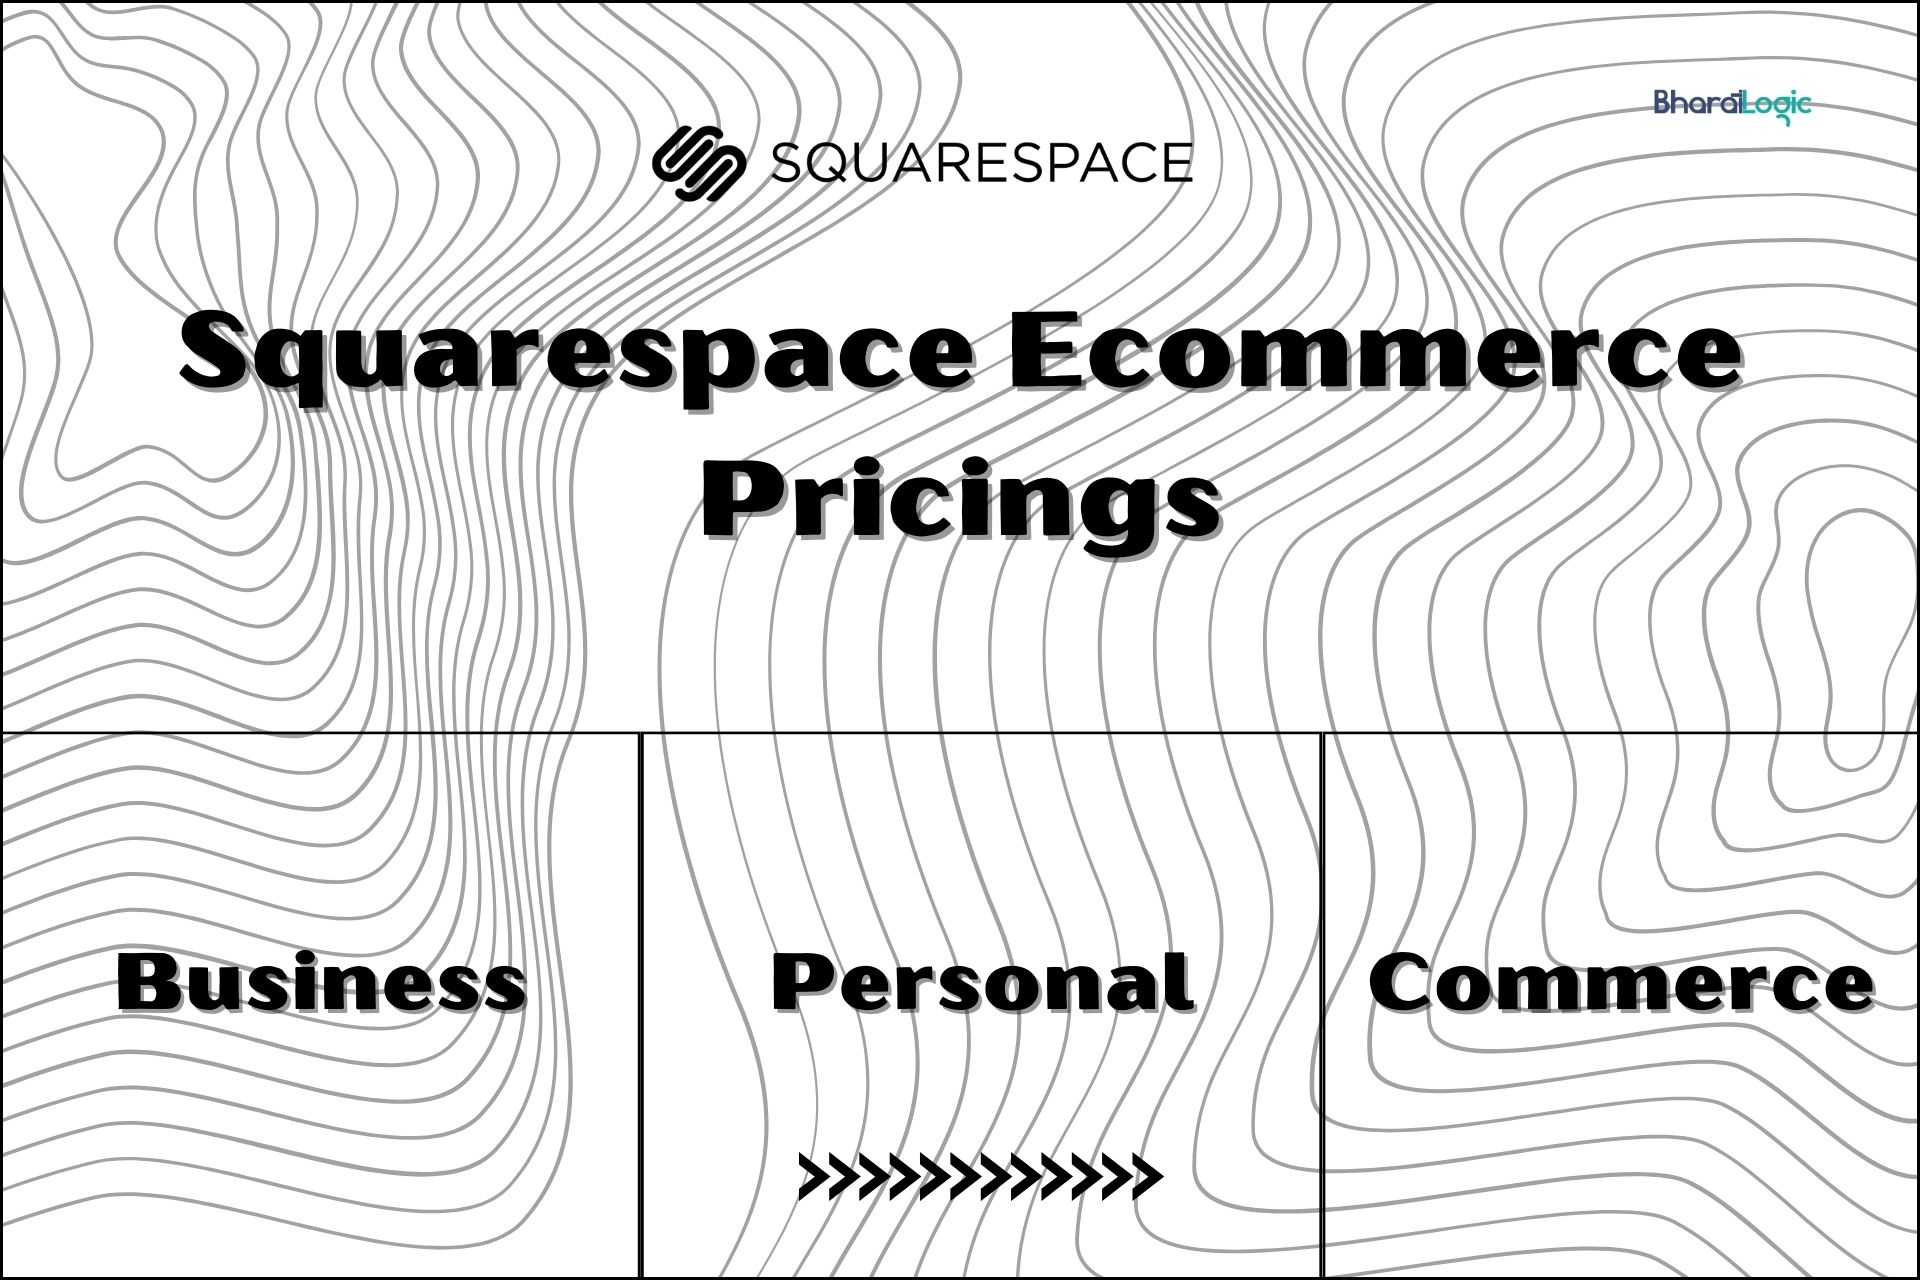 squarespace ecommerce pricing